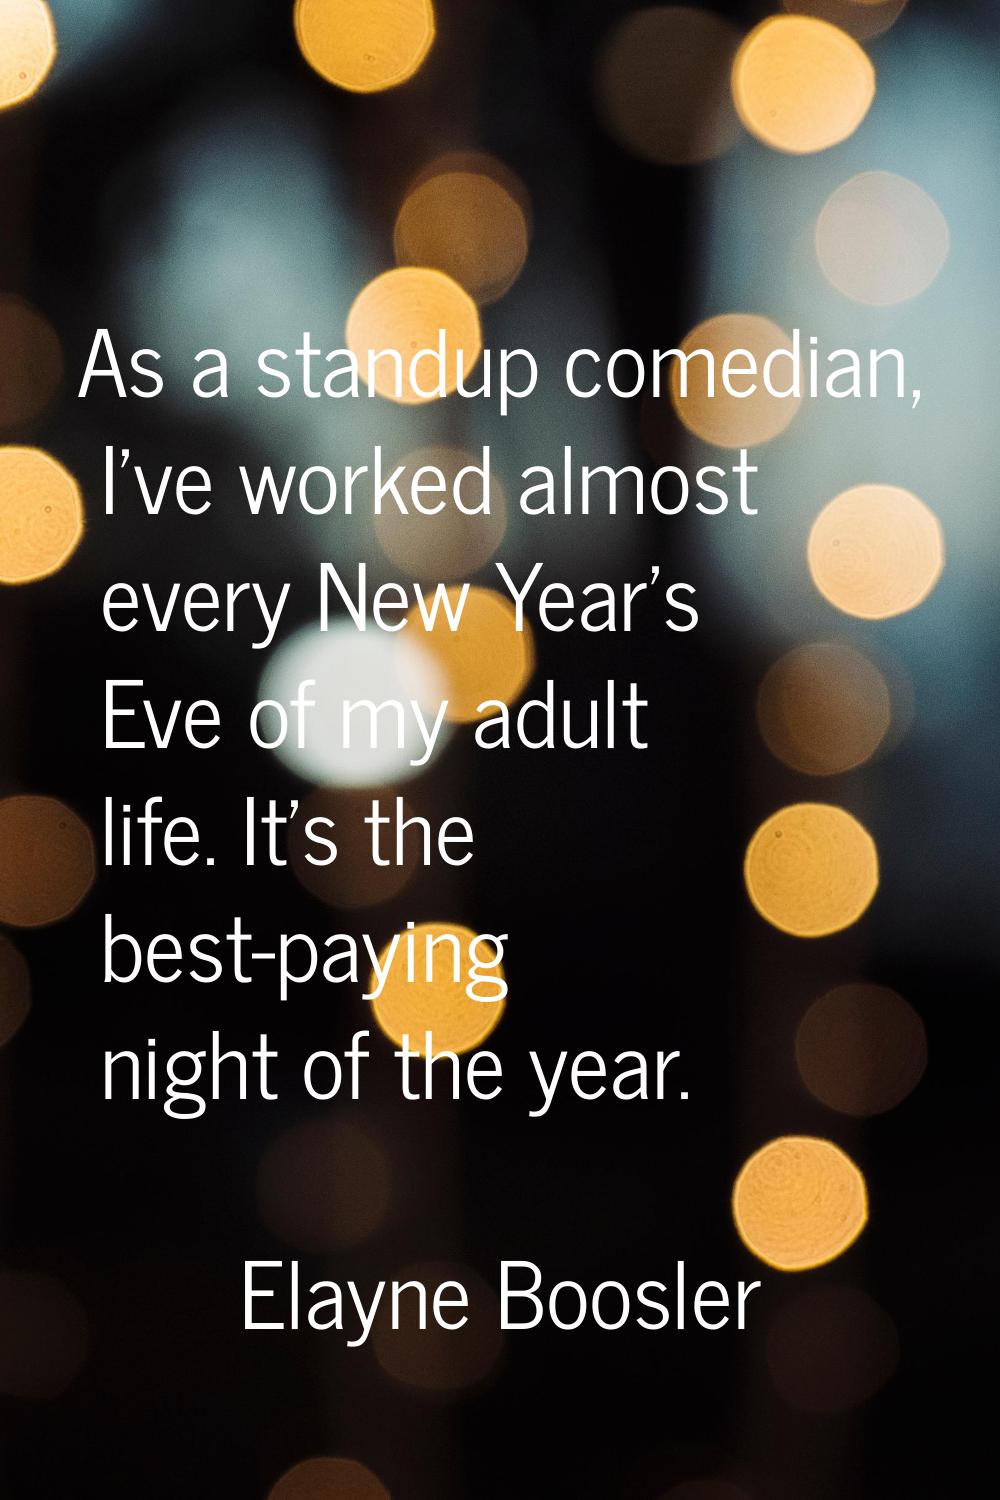 As a standup comedian, I've worked almost every New Year's Eve of my adult life. It's the best-payi